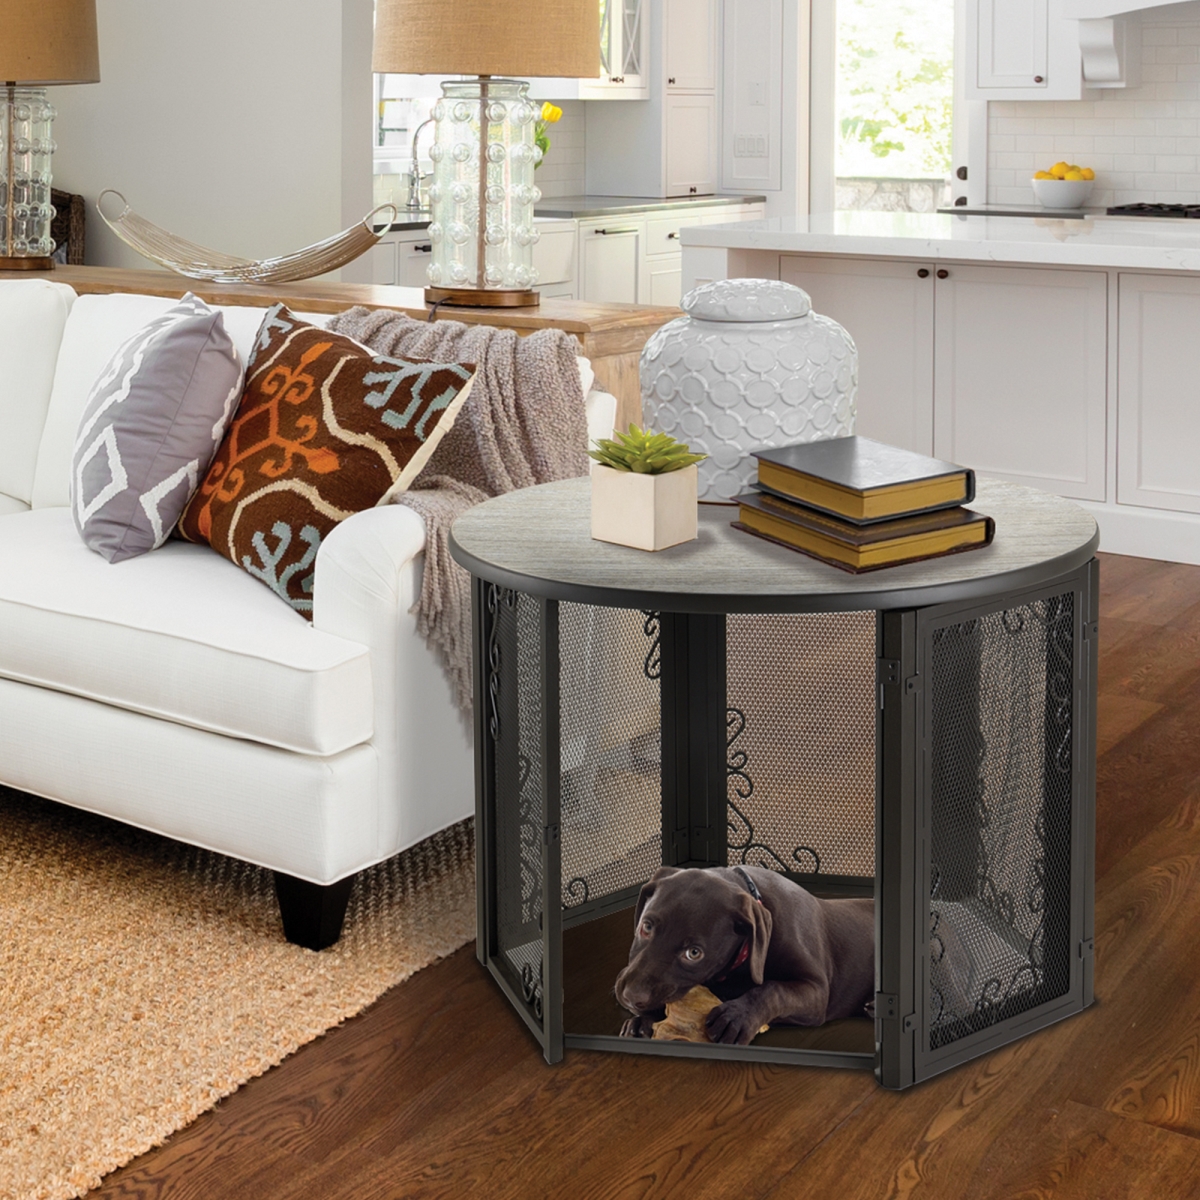 Picture of Richell 80012 Richell Accent Table Pet Crate Medium